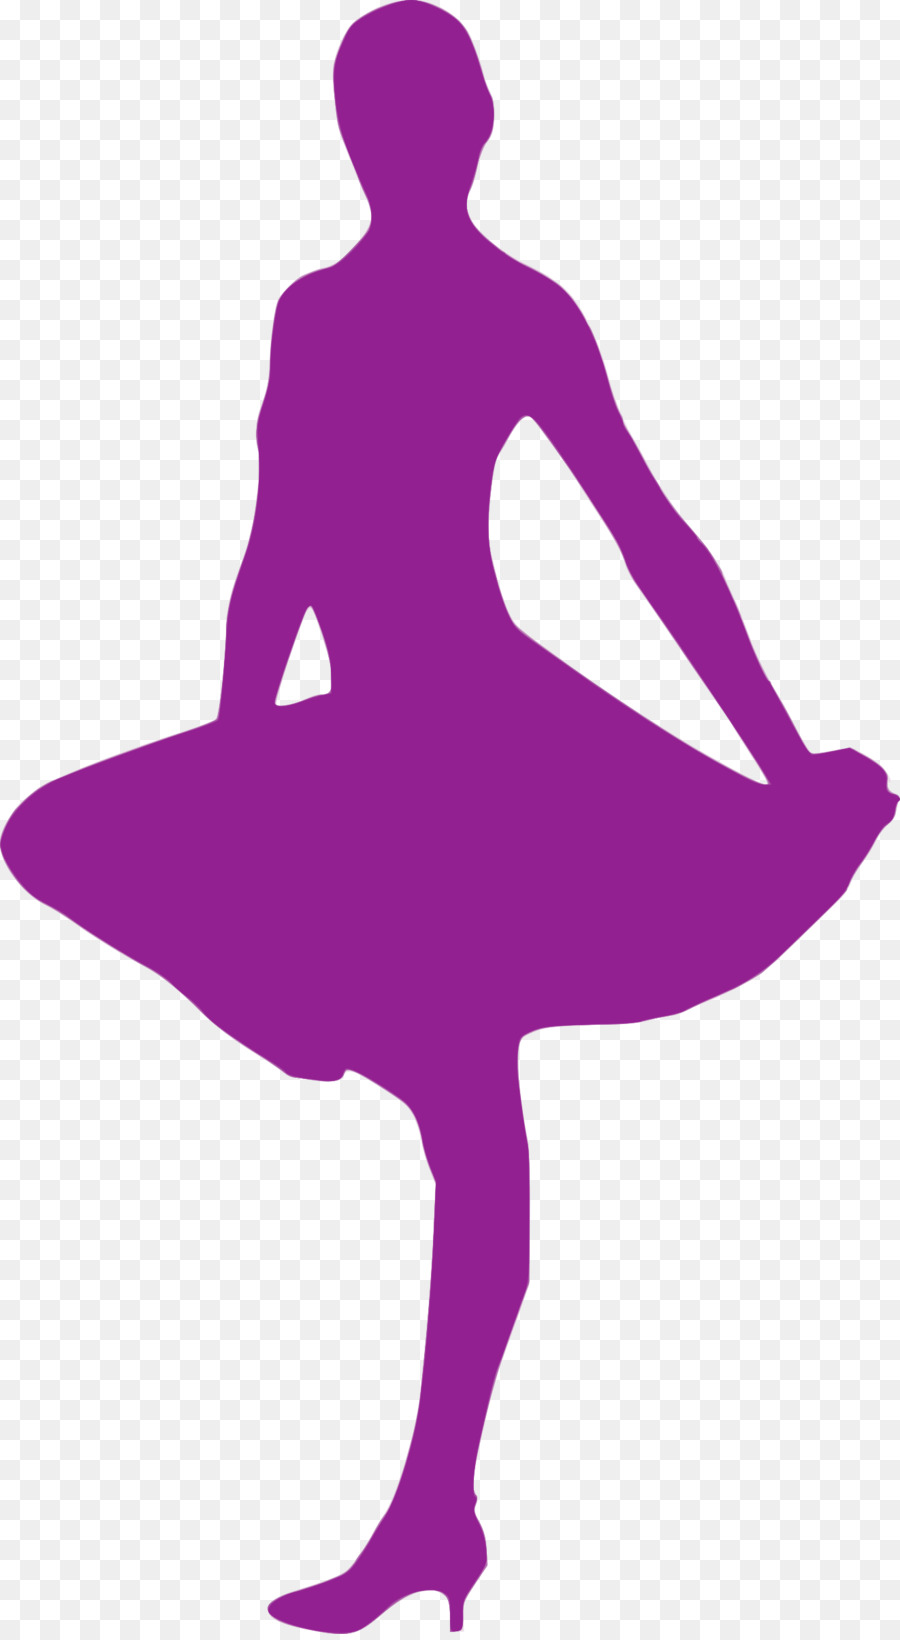 Computer Icons Ballet Dancer Silhouette - Silhouette png download - 1322*2400 - Free Transparent Computer Icons png Download.